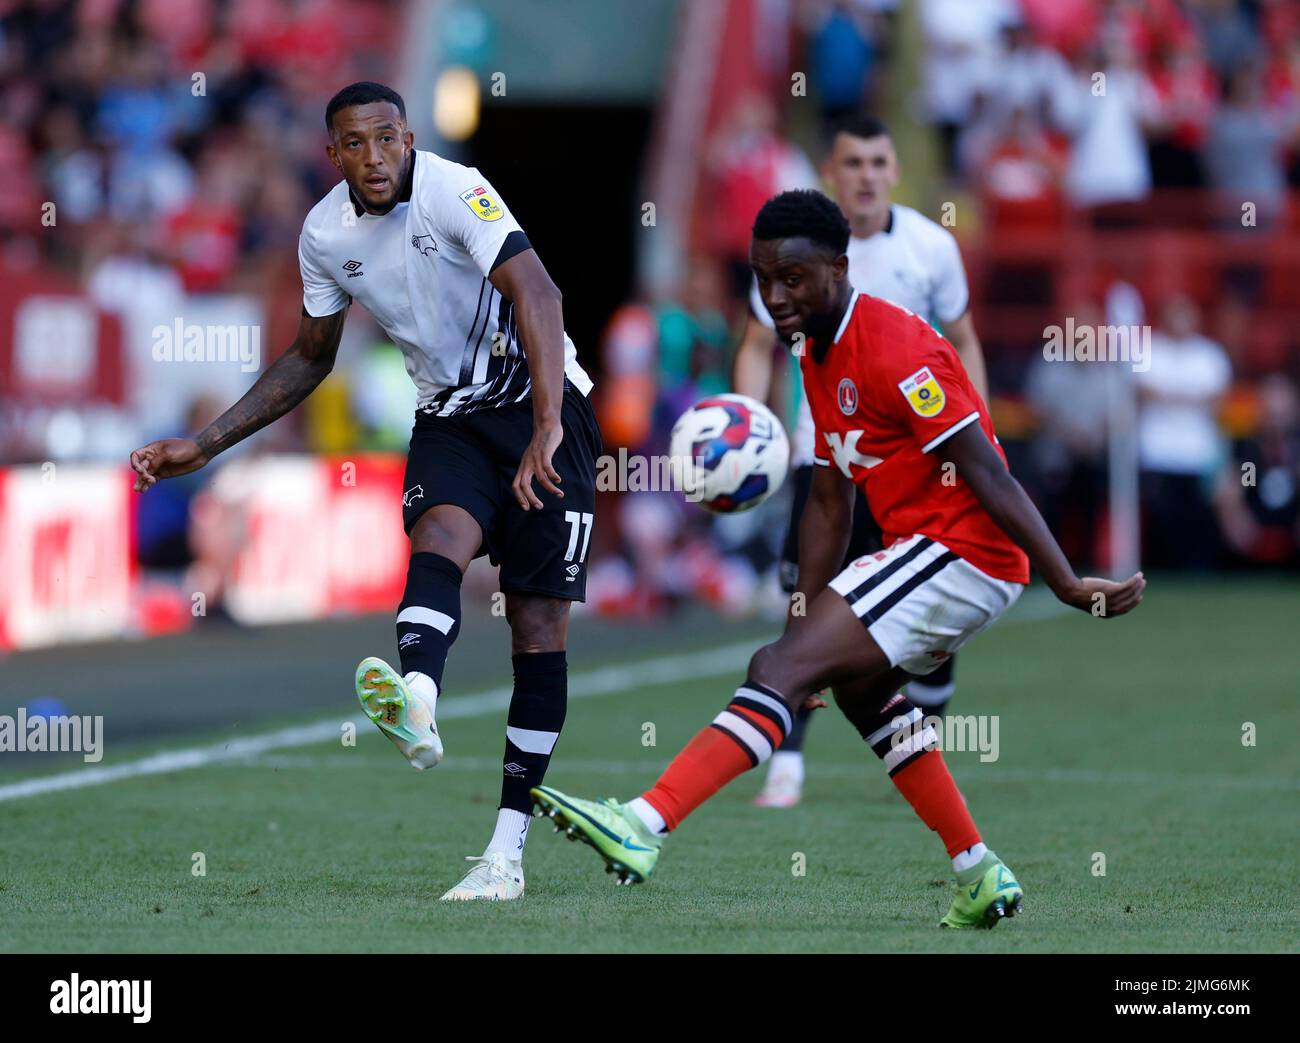 Derby County's Nathaniel Mendez-Laing (left) passes the ball past Charlton Athletic's Steven Sessegnon during the Sky Bet League One match at The Valley, London. Picture date: Saturday August 6, 2022. Stock Photo